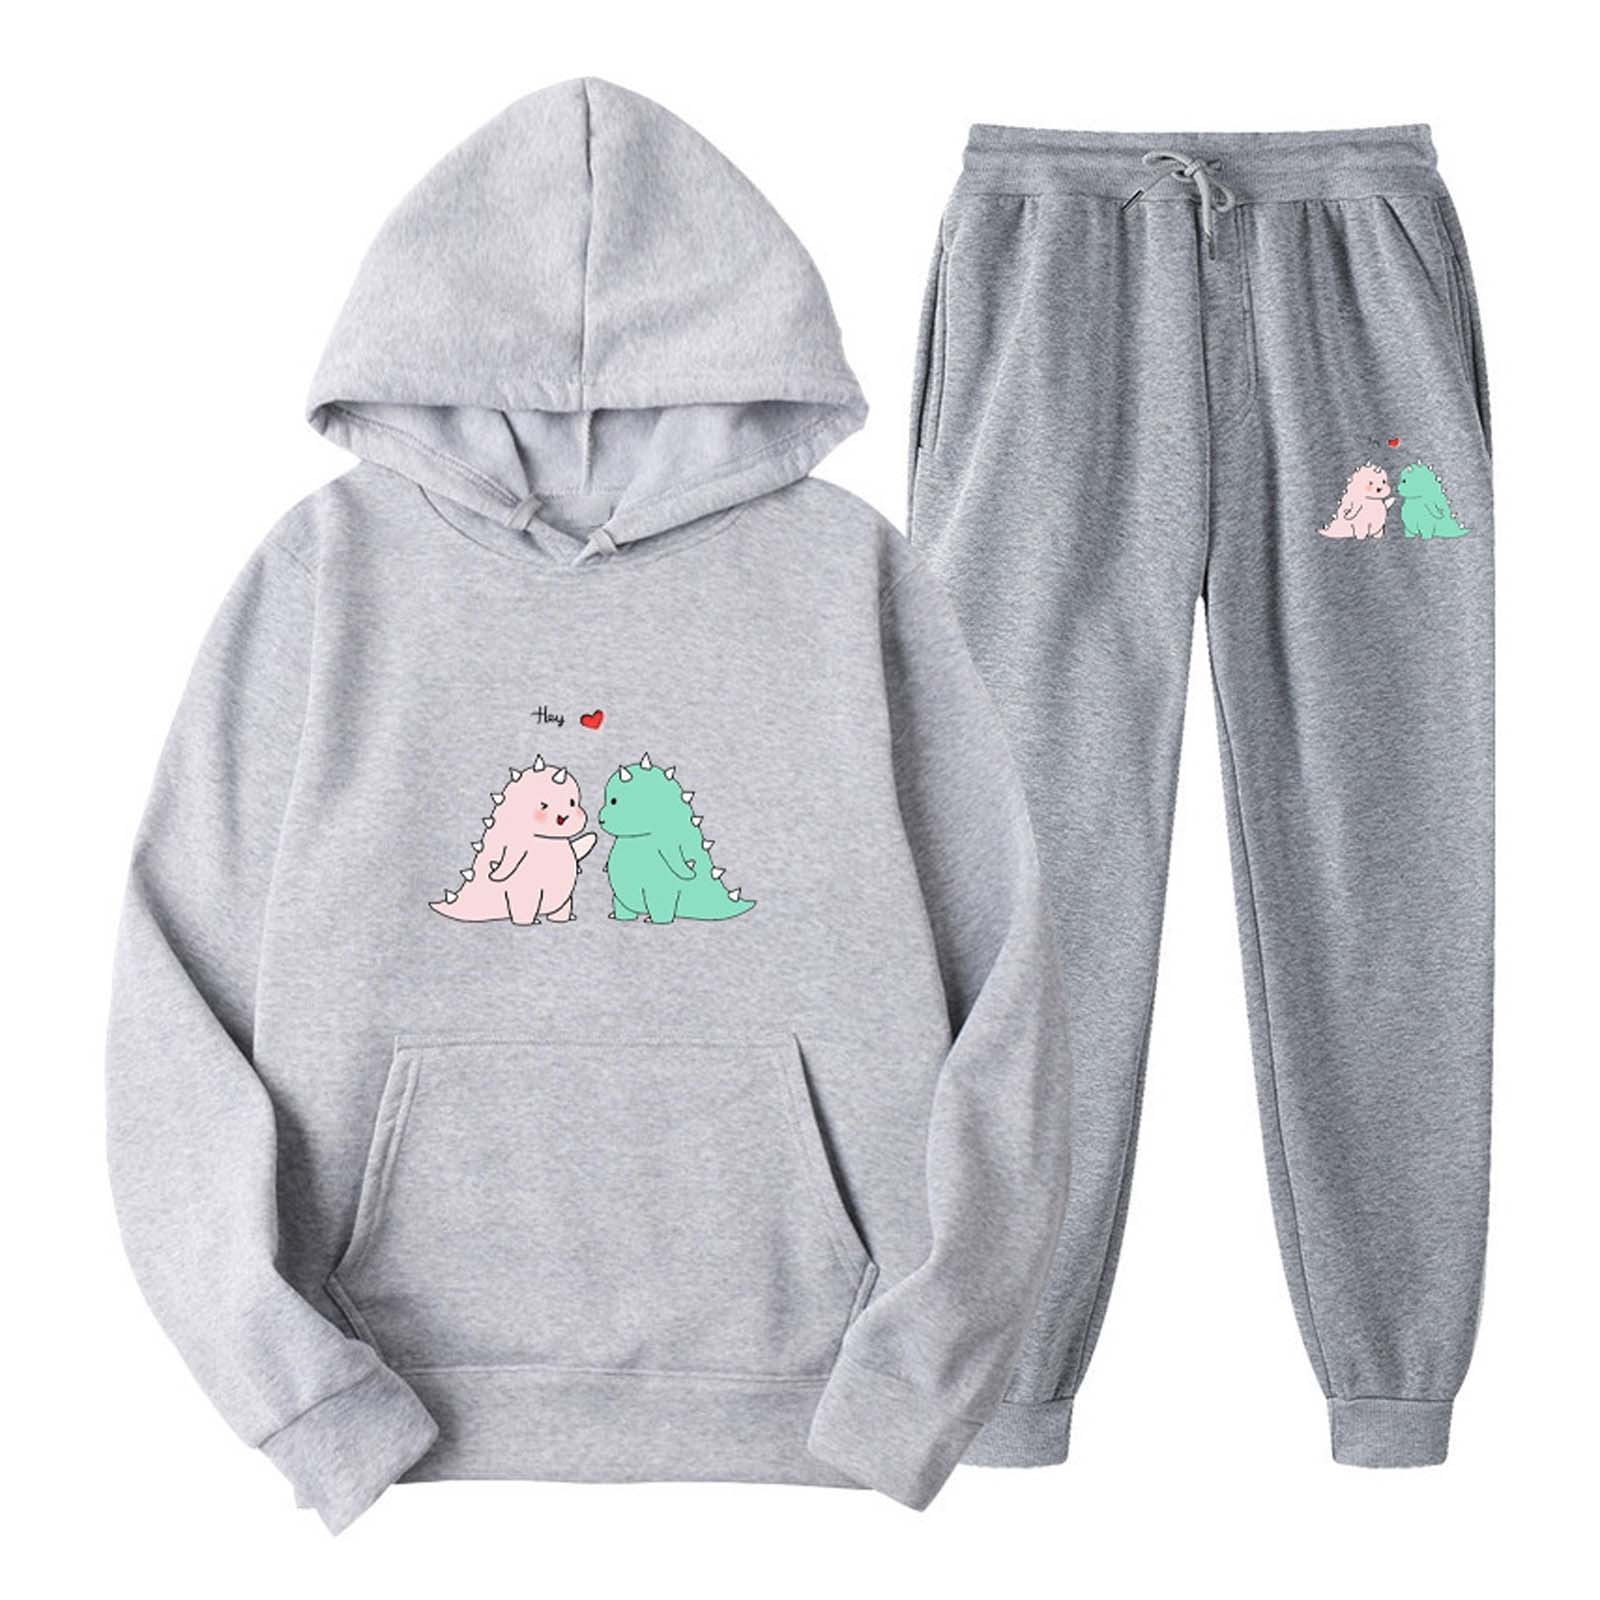 RQYYD Reduced Cute Dinosaur Graphic Hoodies and Sweatpants Set Men